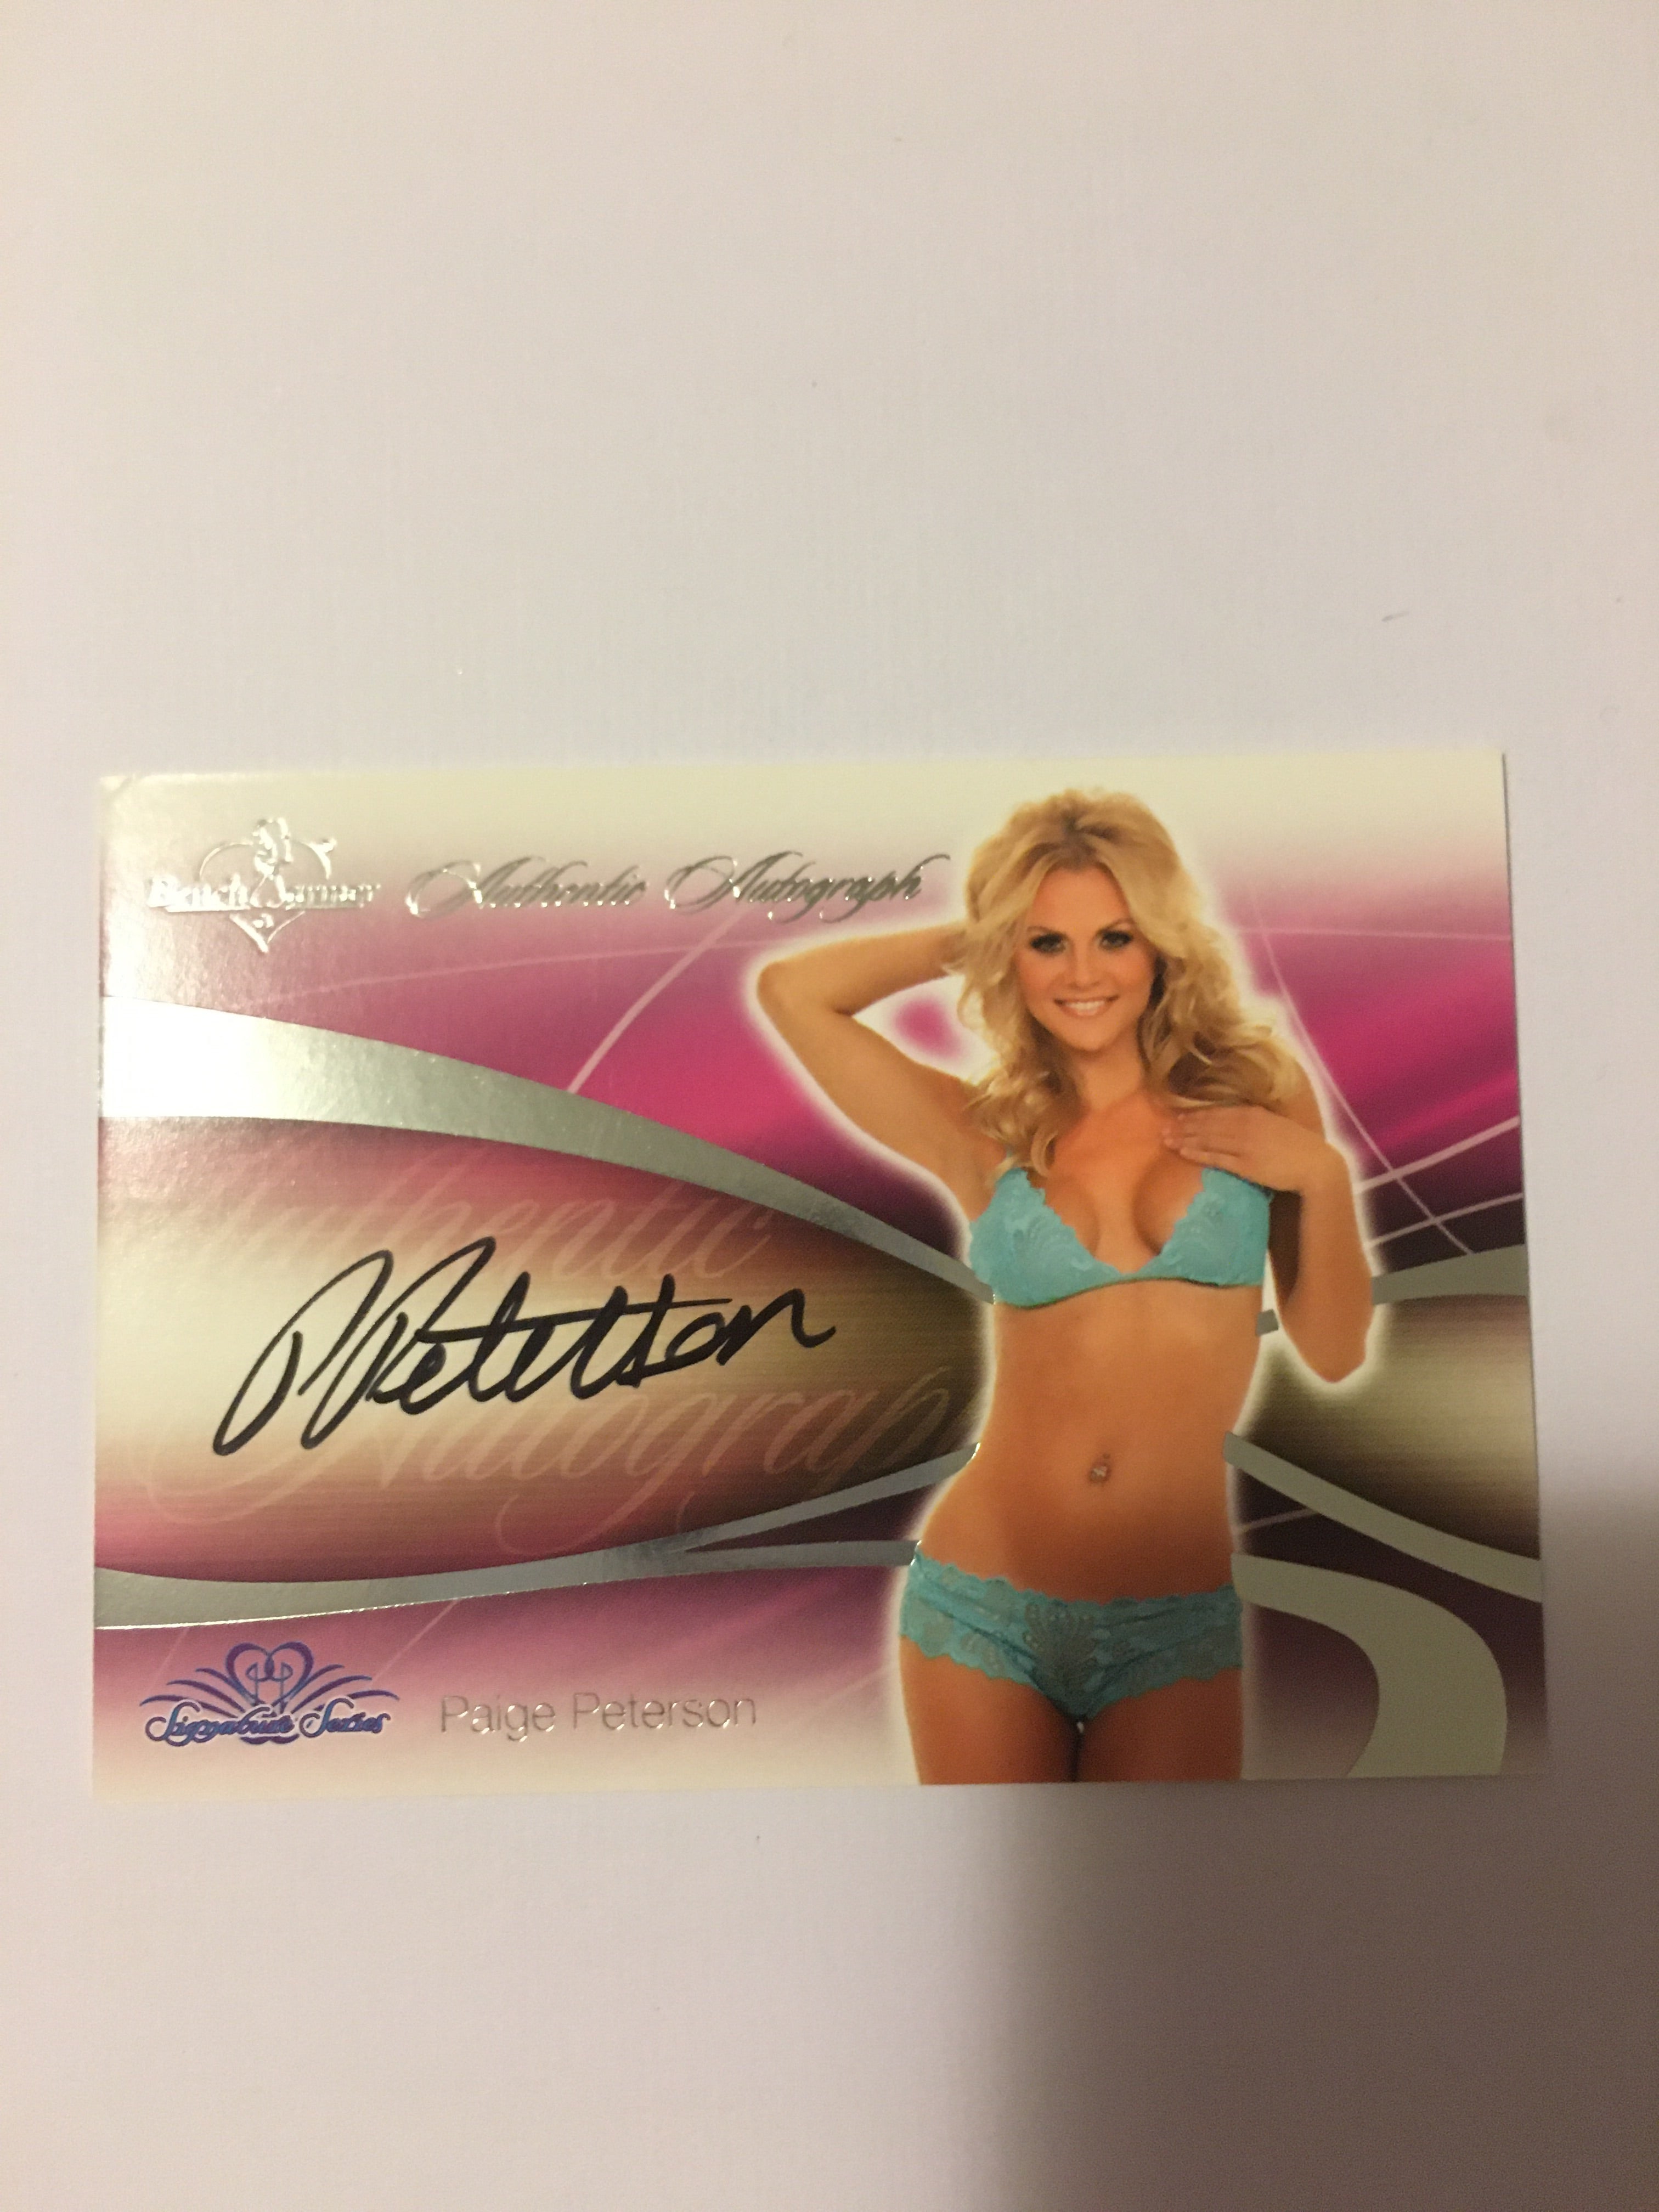 Paige Peterson - Autographed Benchwarmer Trading Card (1)